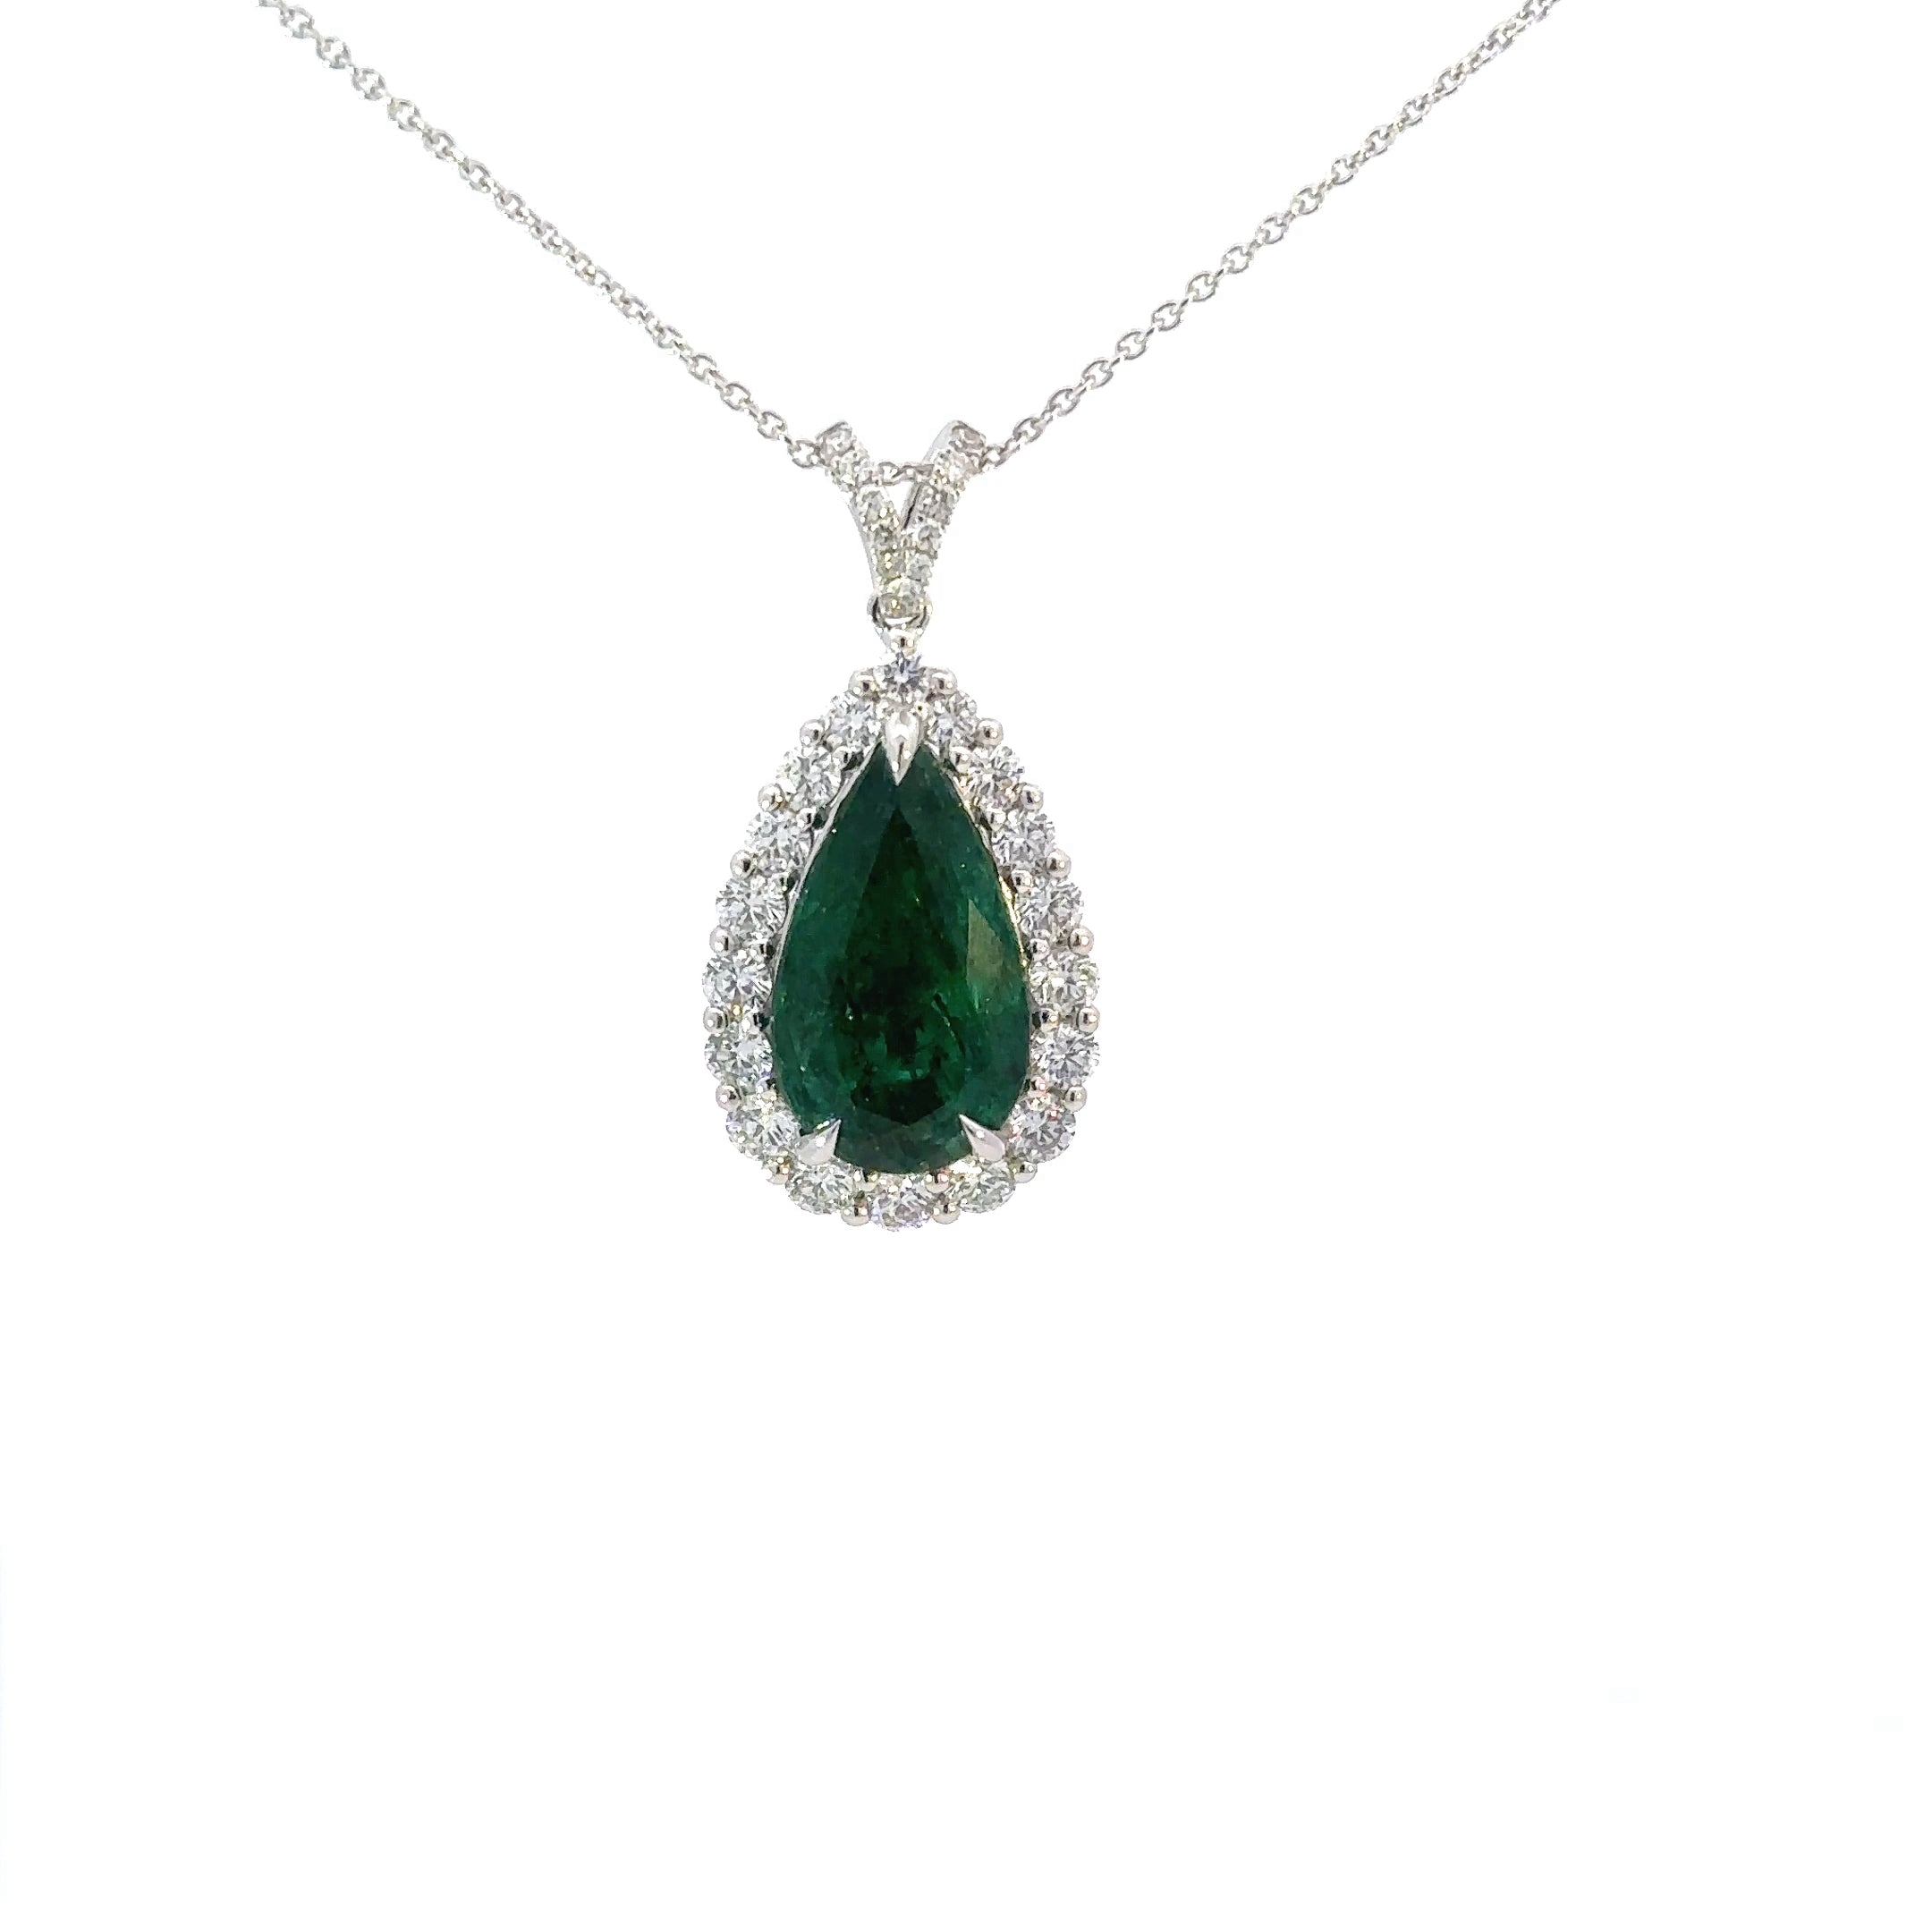 18kt GIA 5.92ct Emerald
1.28